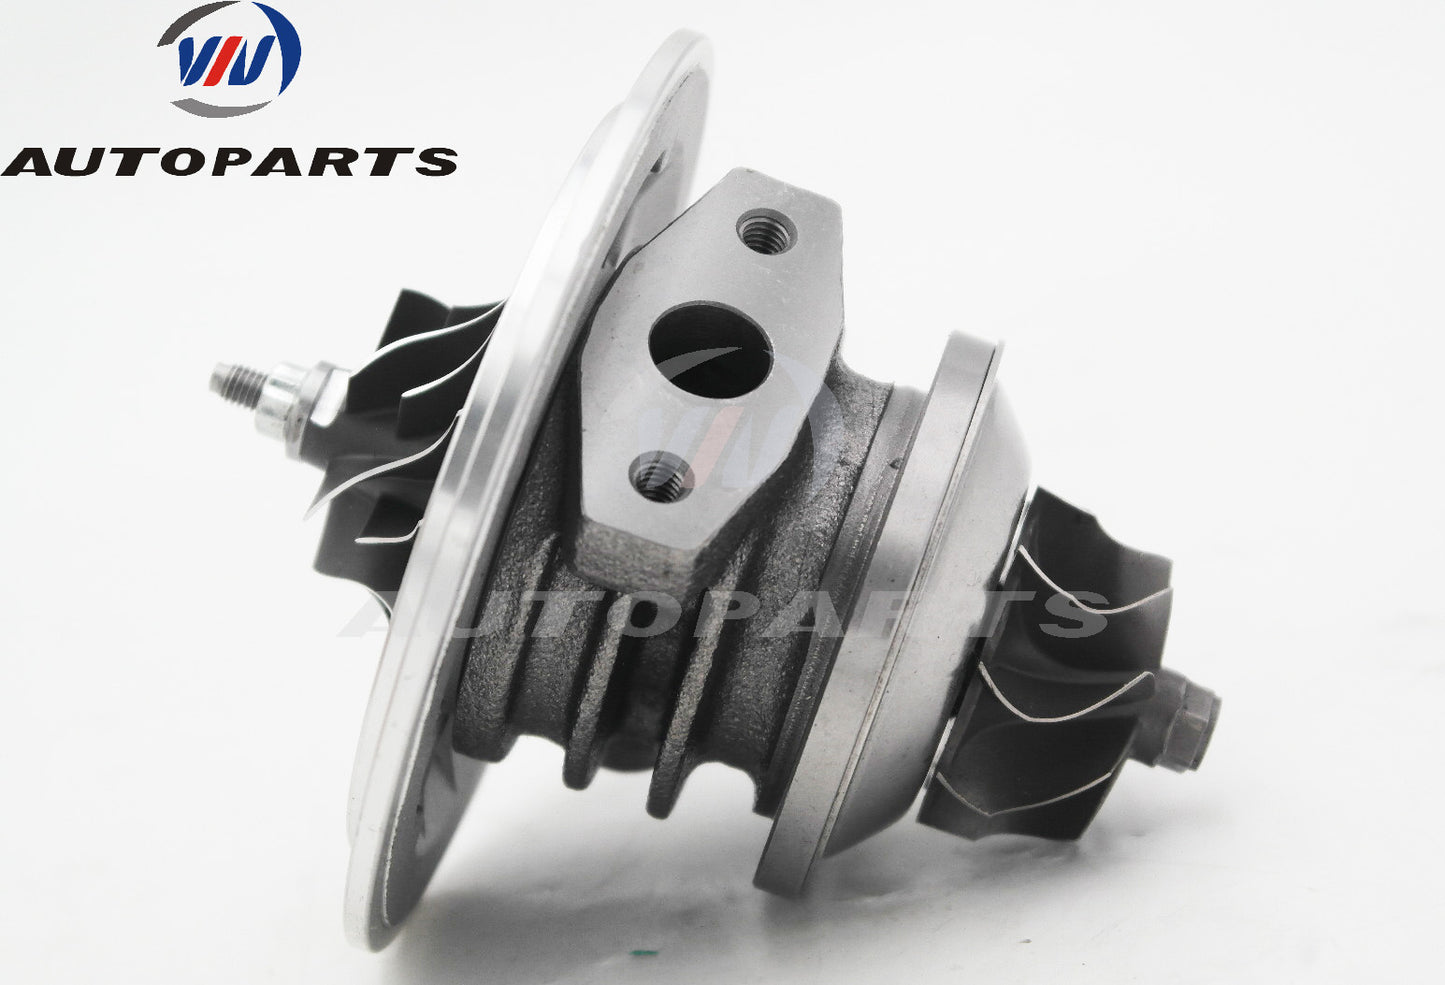 CHRA 433289-0079 for Turbocharger 717345-0002 for Renault Volvo Mitsubishi Opel 1.9L Diesel Engine